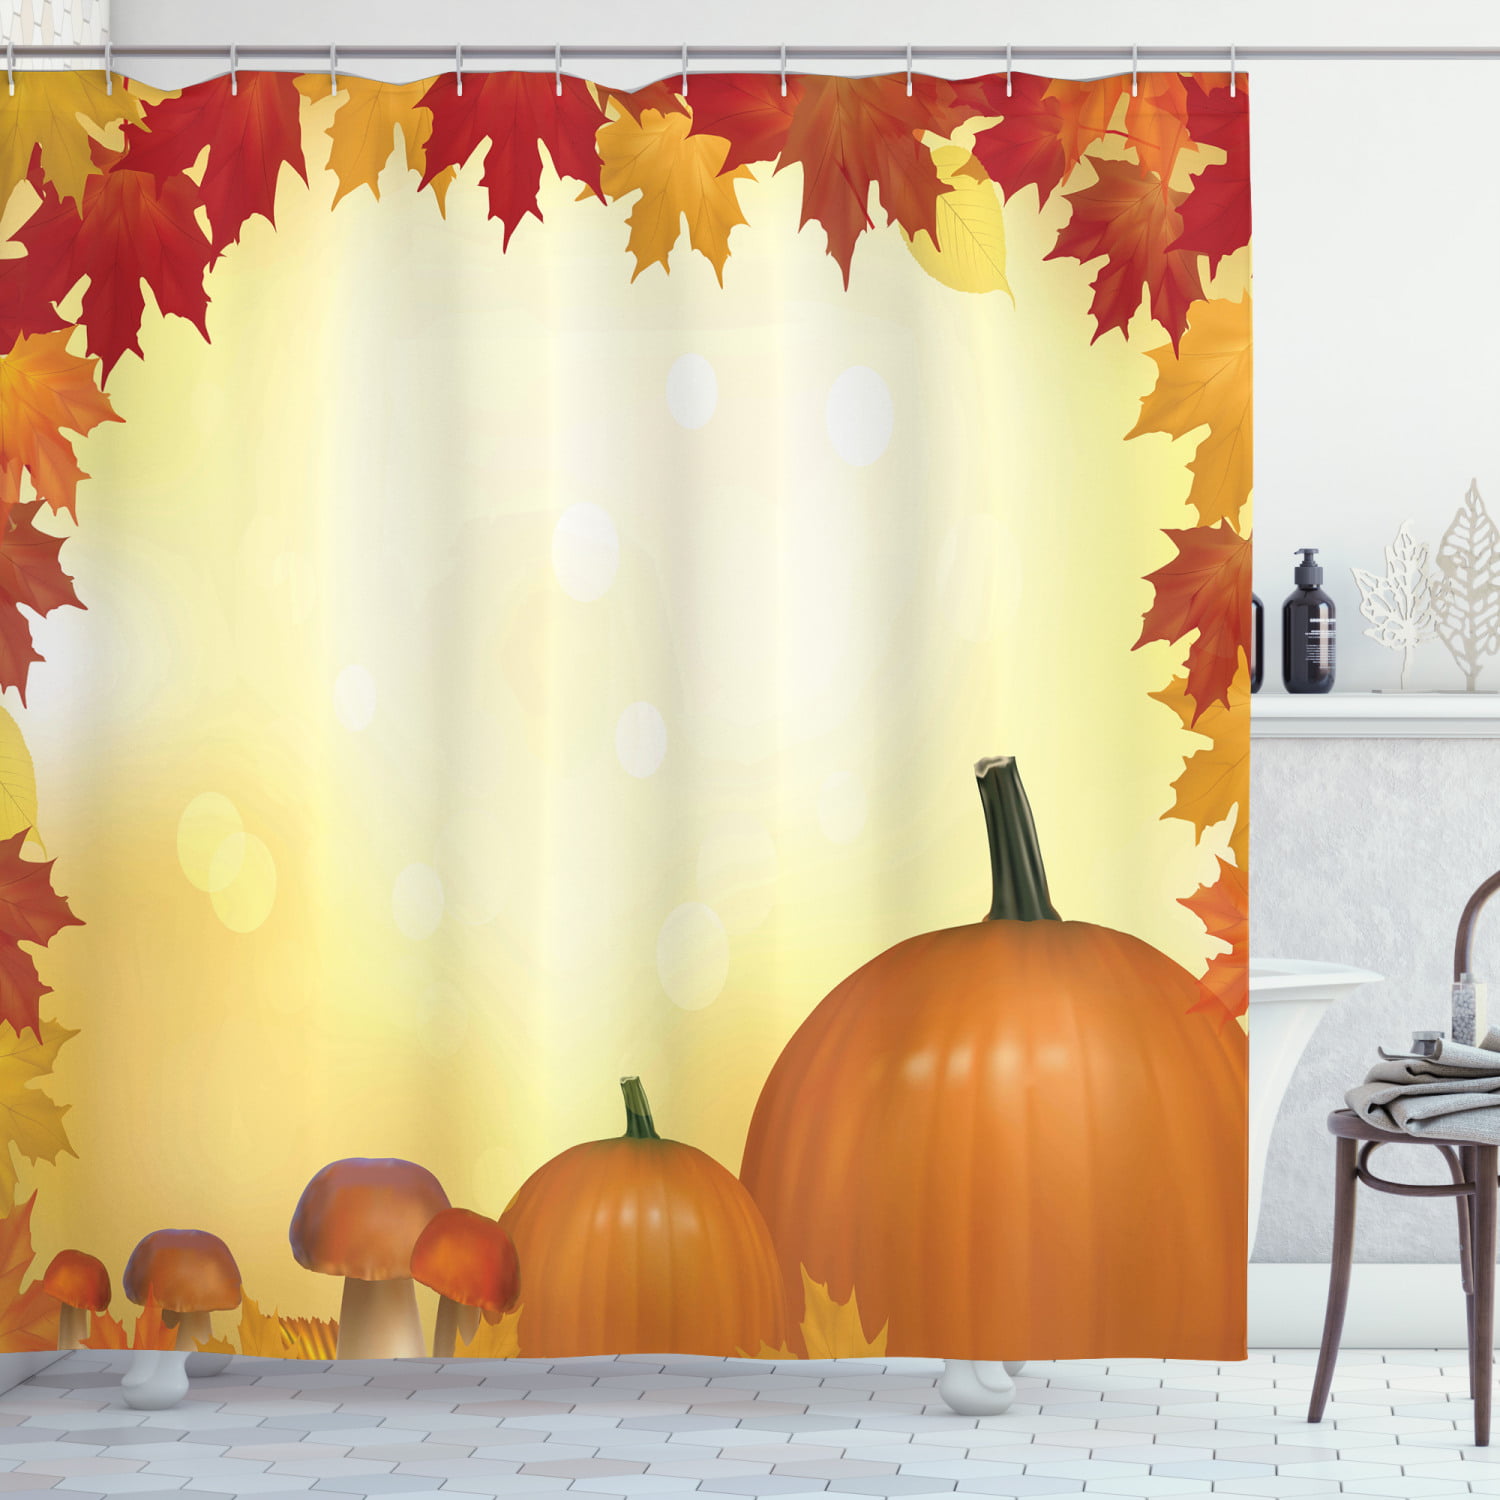 24 x 72 Harvest Kitchen Mats for Floor Pale Yellow Orange Red Mushrooms and Pumpkins with Autumn Tree Leaves Framework Bokeh Effect Area Rugs